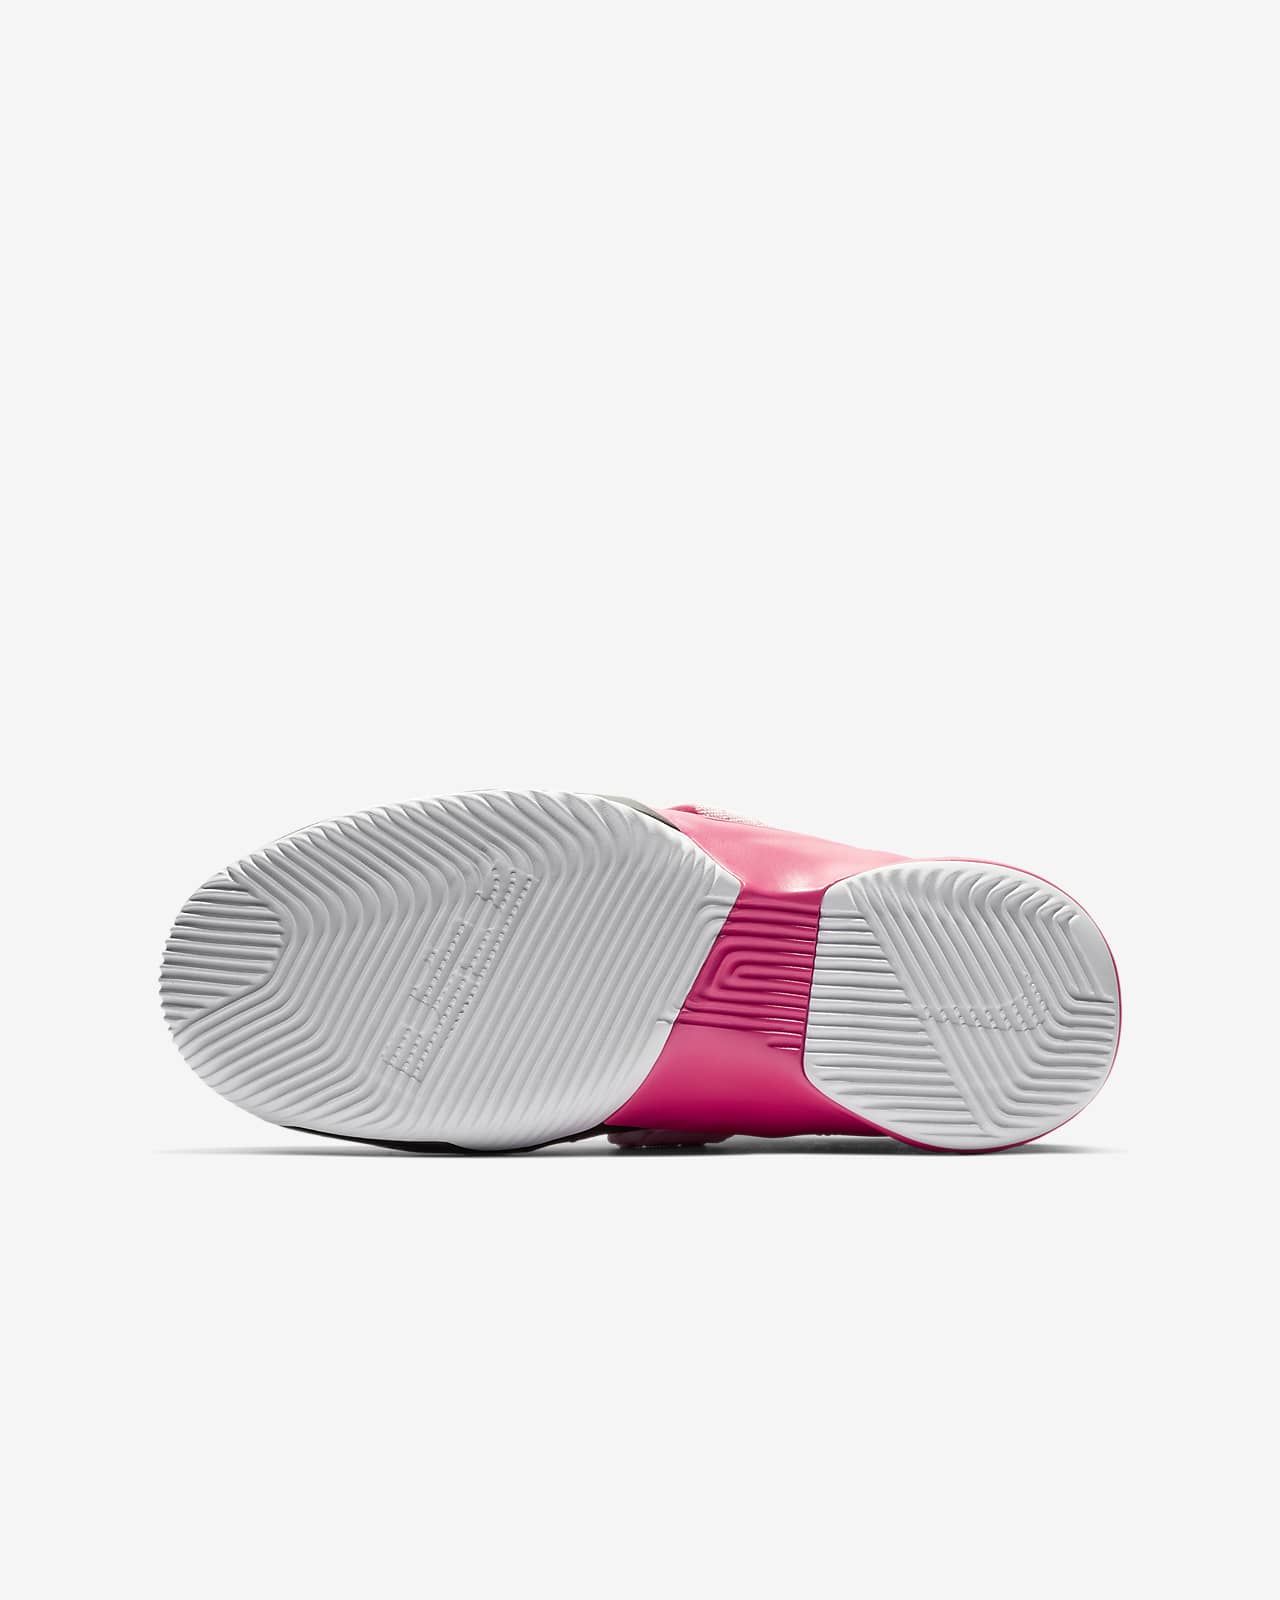 lebron soldier 12 womens